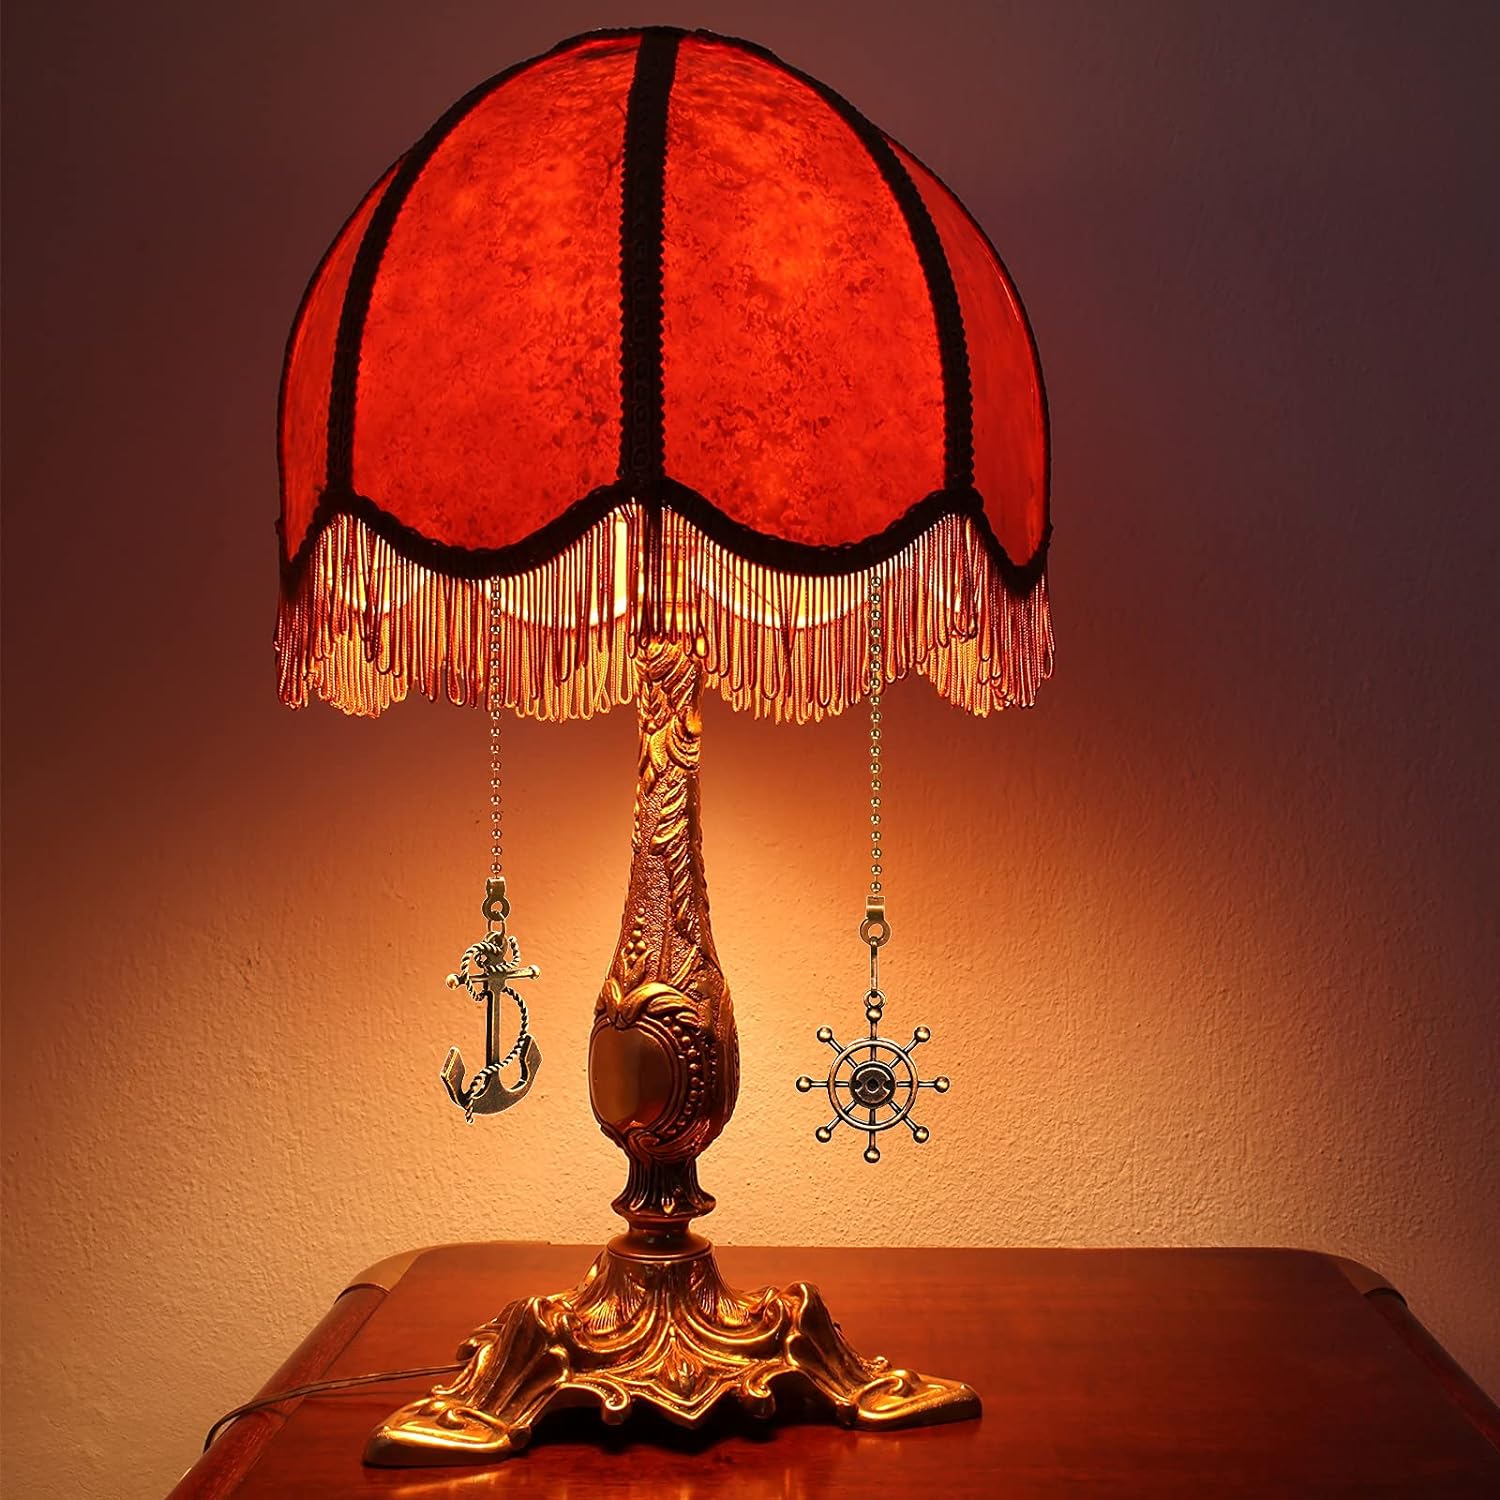 How Do I Know If My Antique Lamp Is Valuable